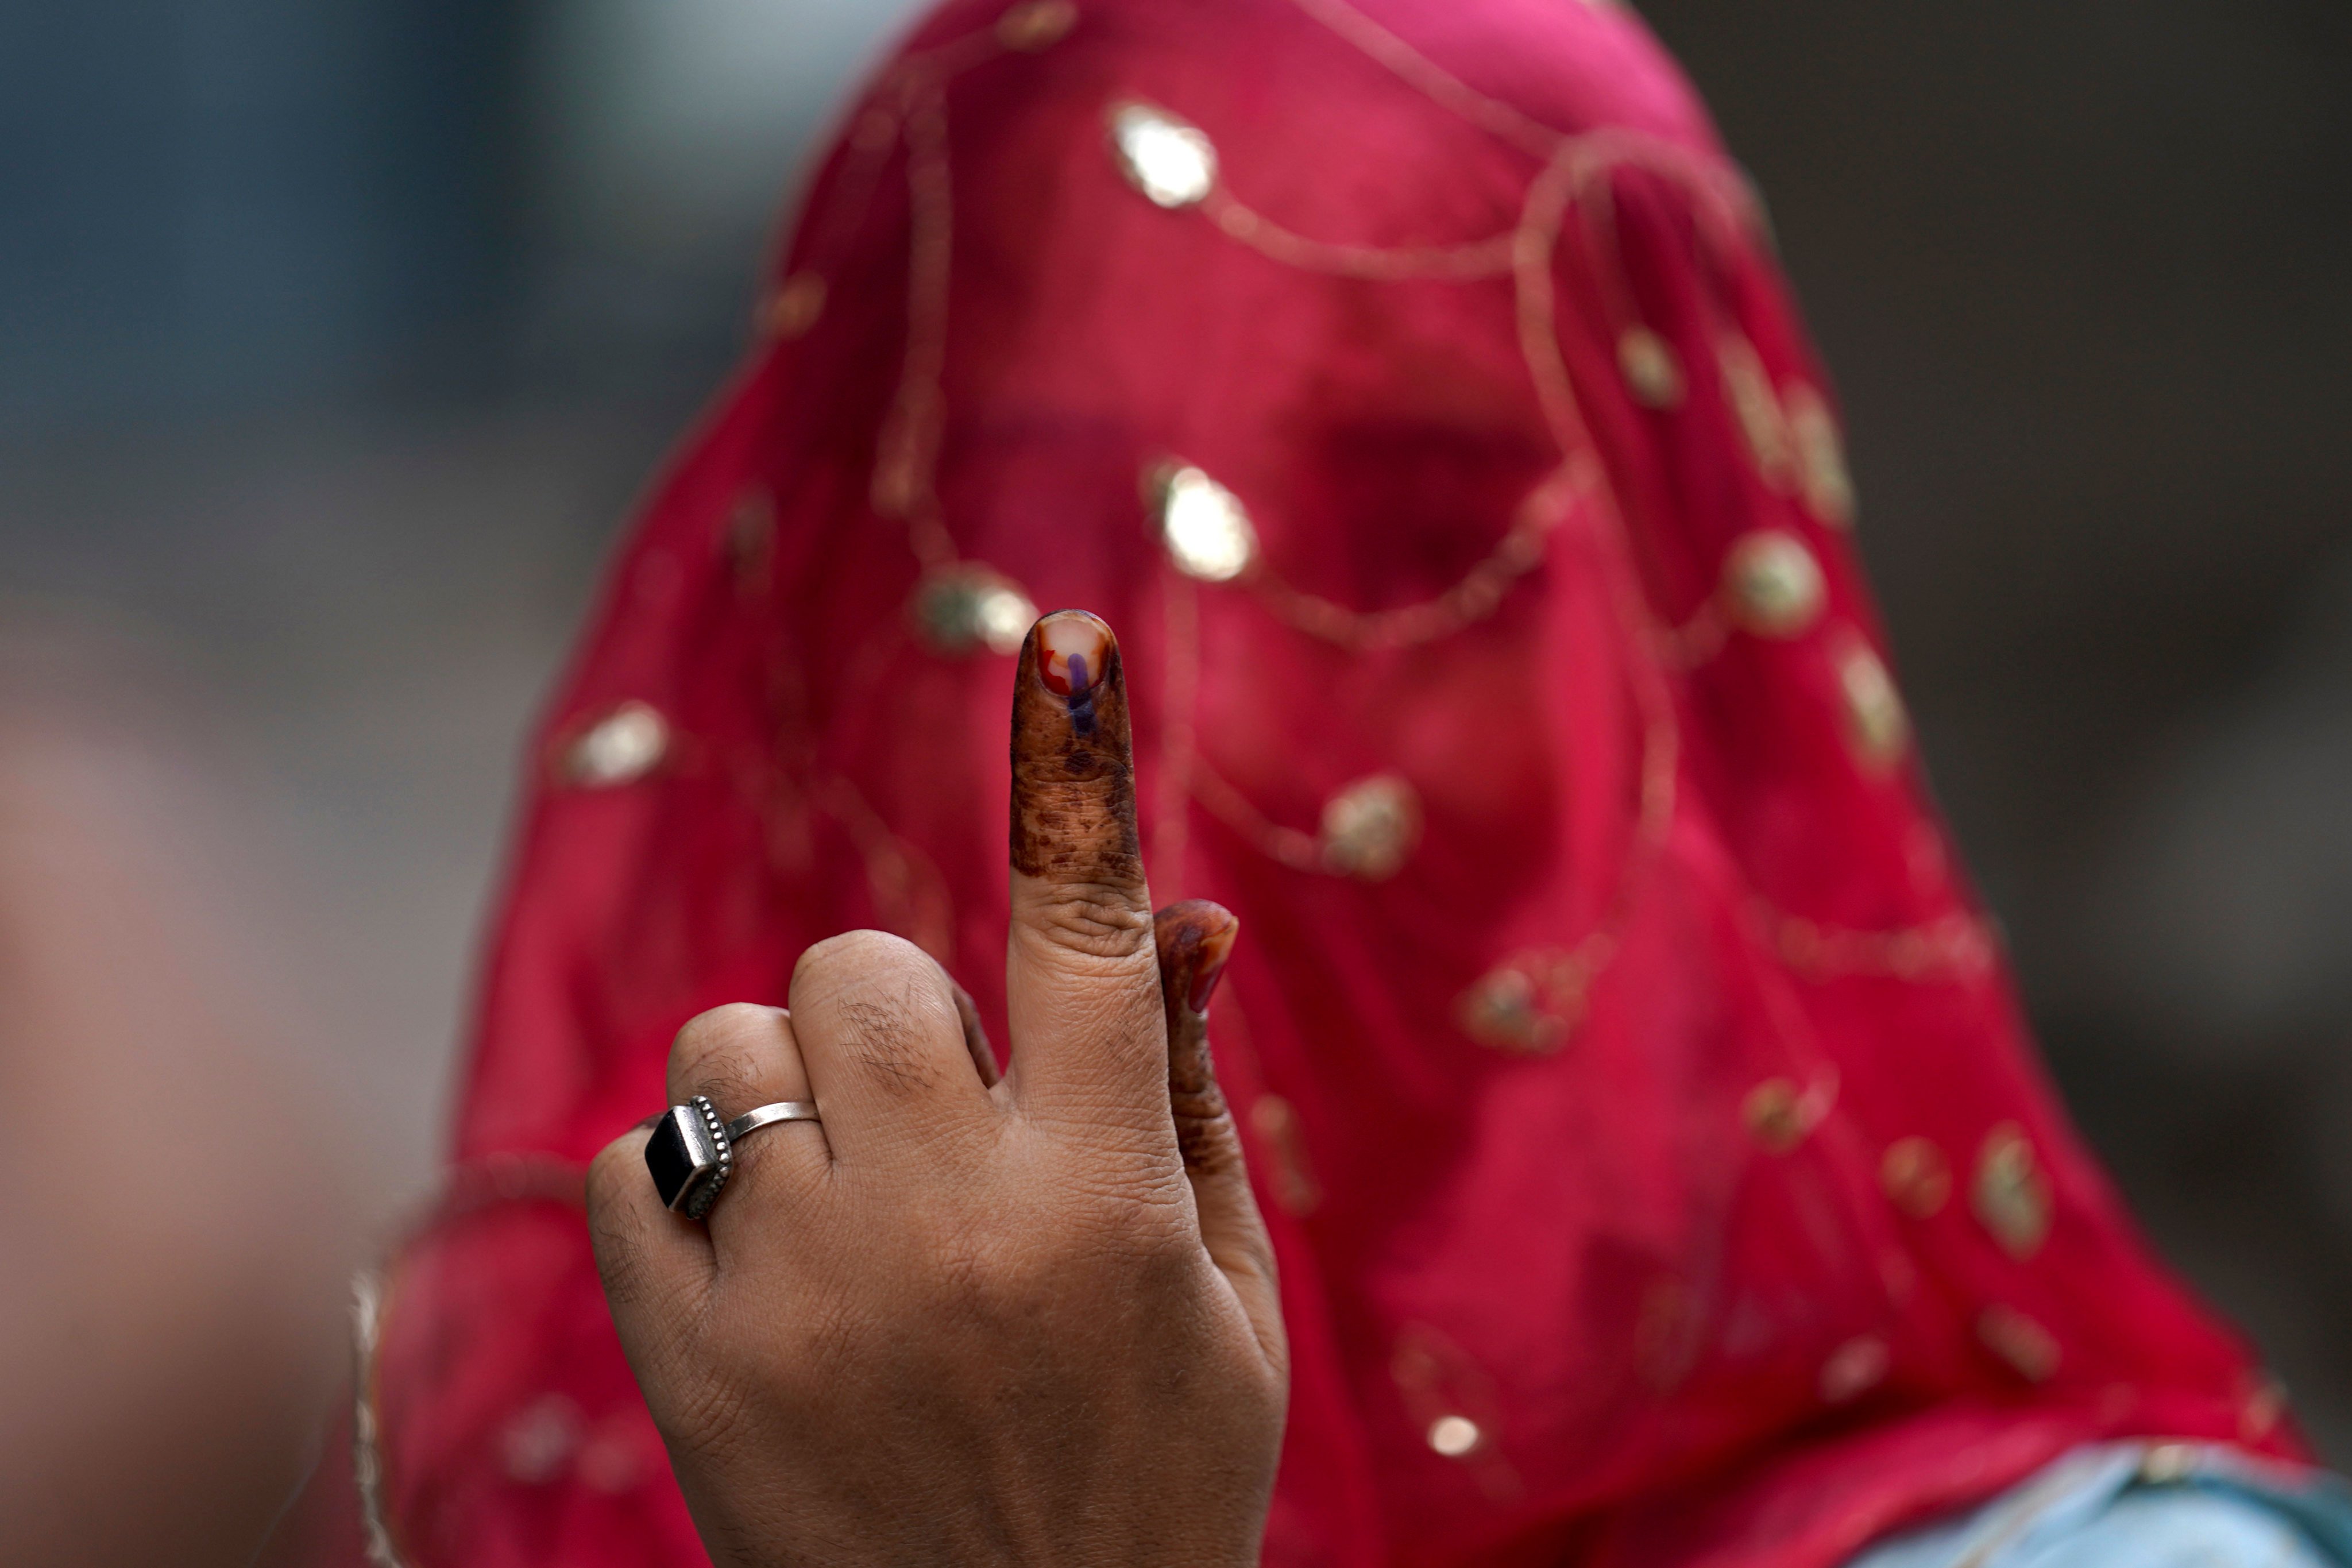 A woman in Hyderabad shows the indelible ink mark on her finger after casting her vote in November’s Telangana state assembly elections. Photo: AP